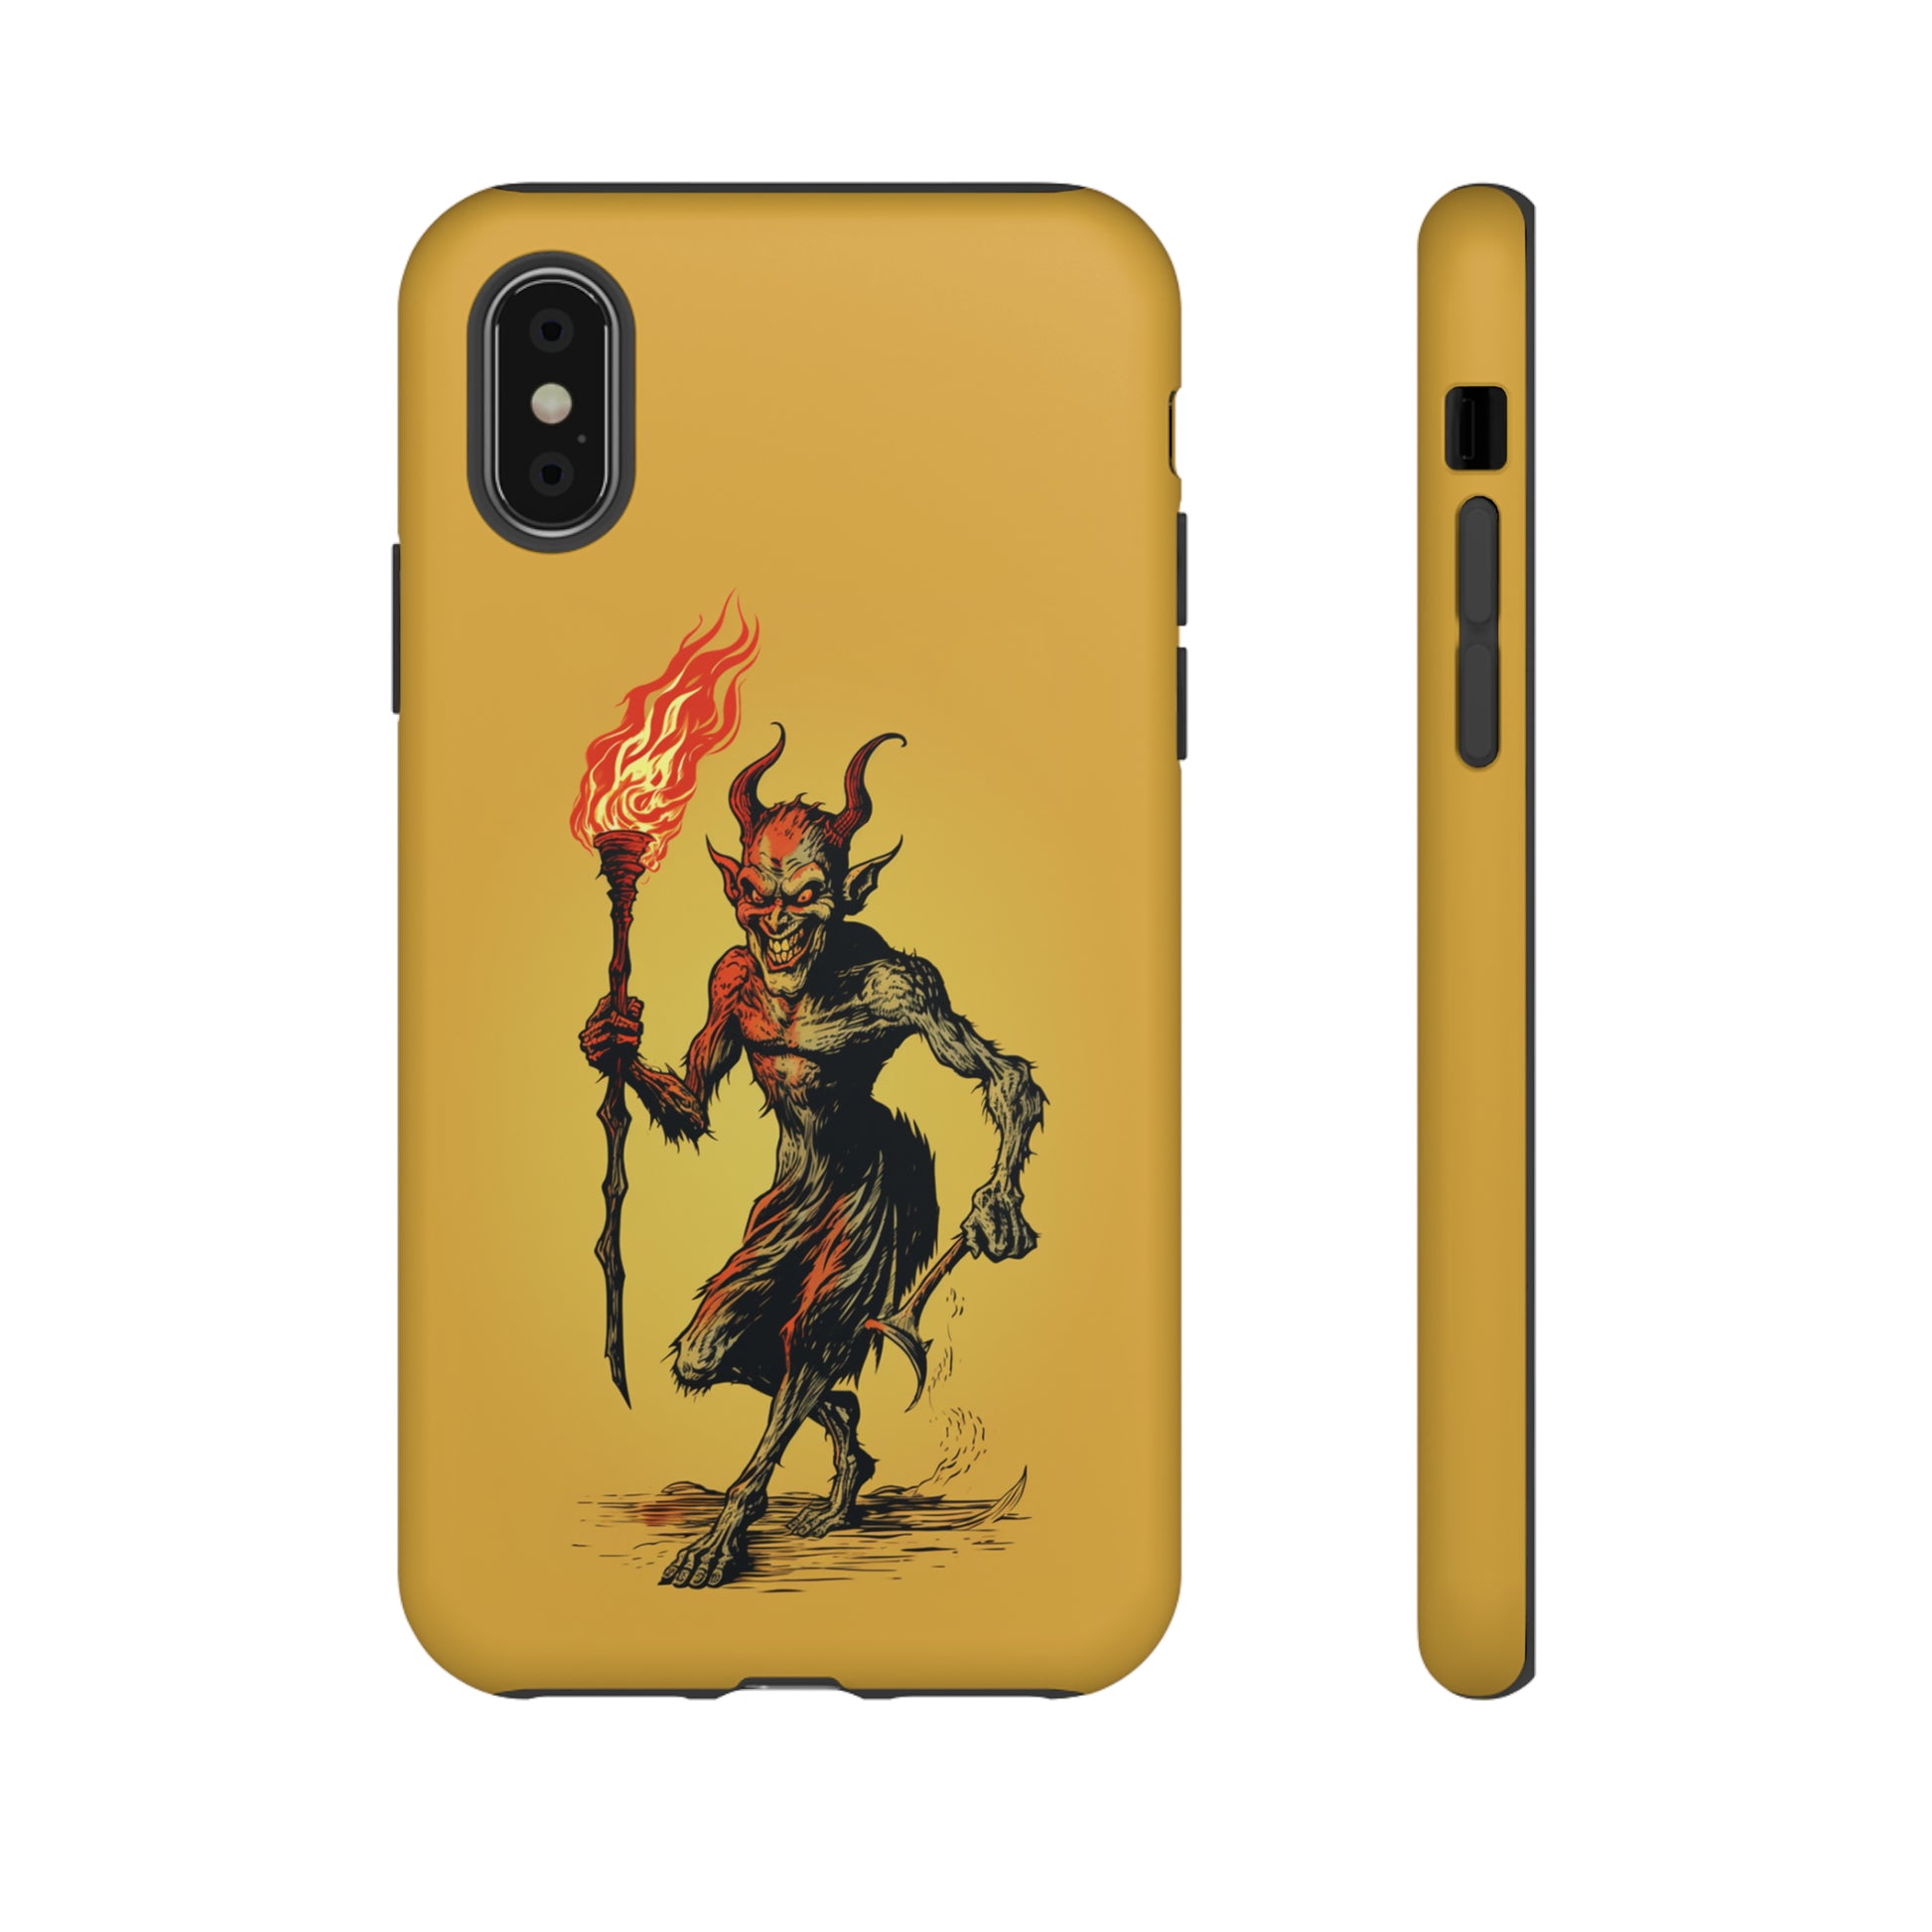 Whimsical Demon design on durable iPhone 7 Plus case